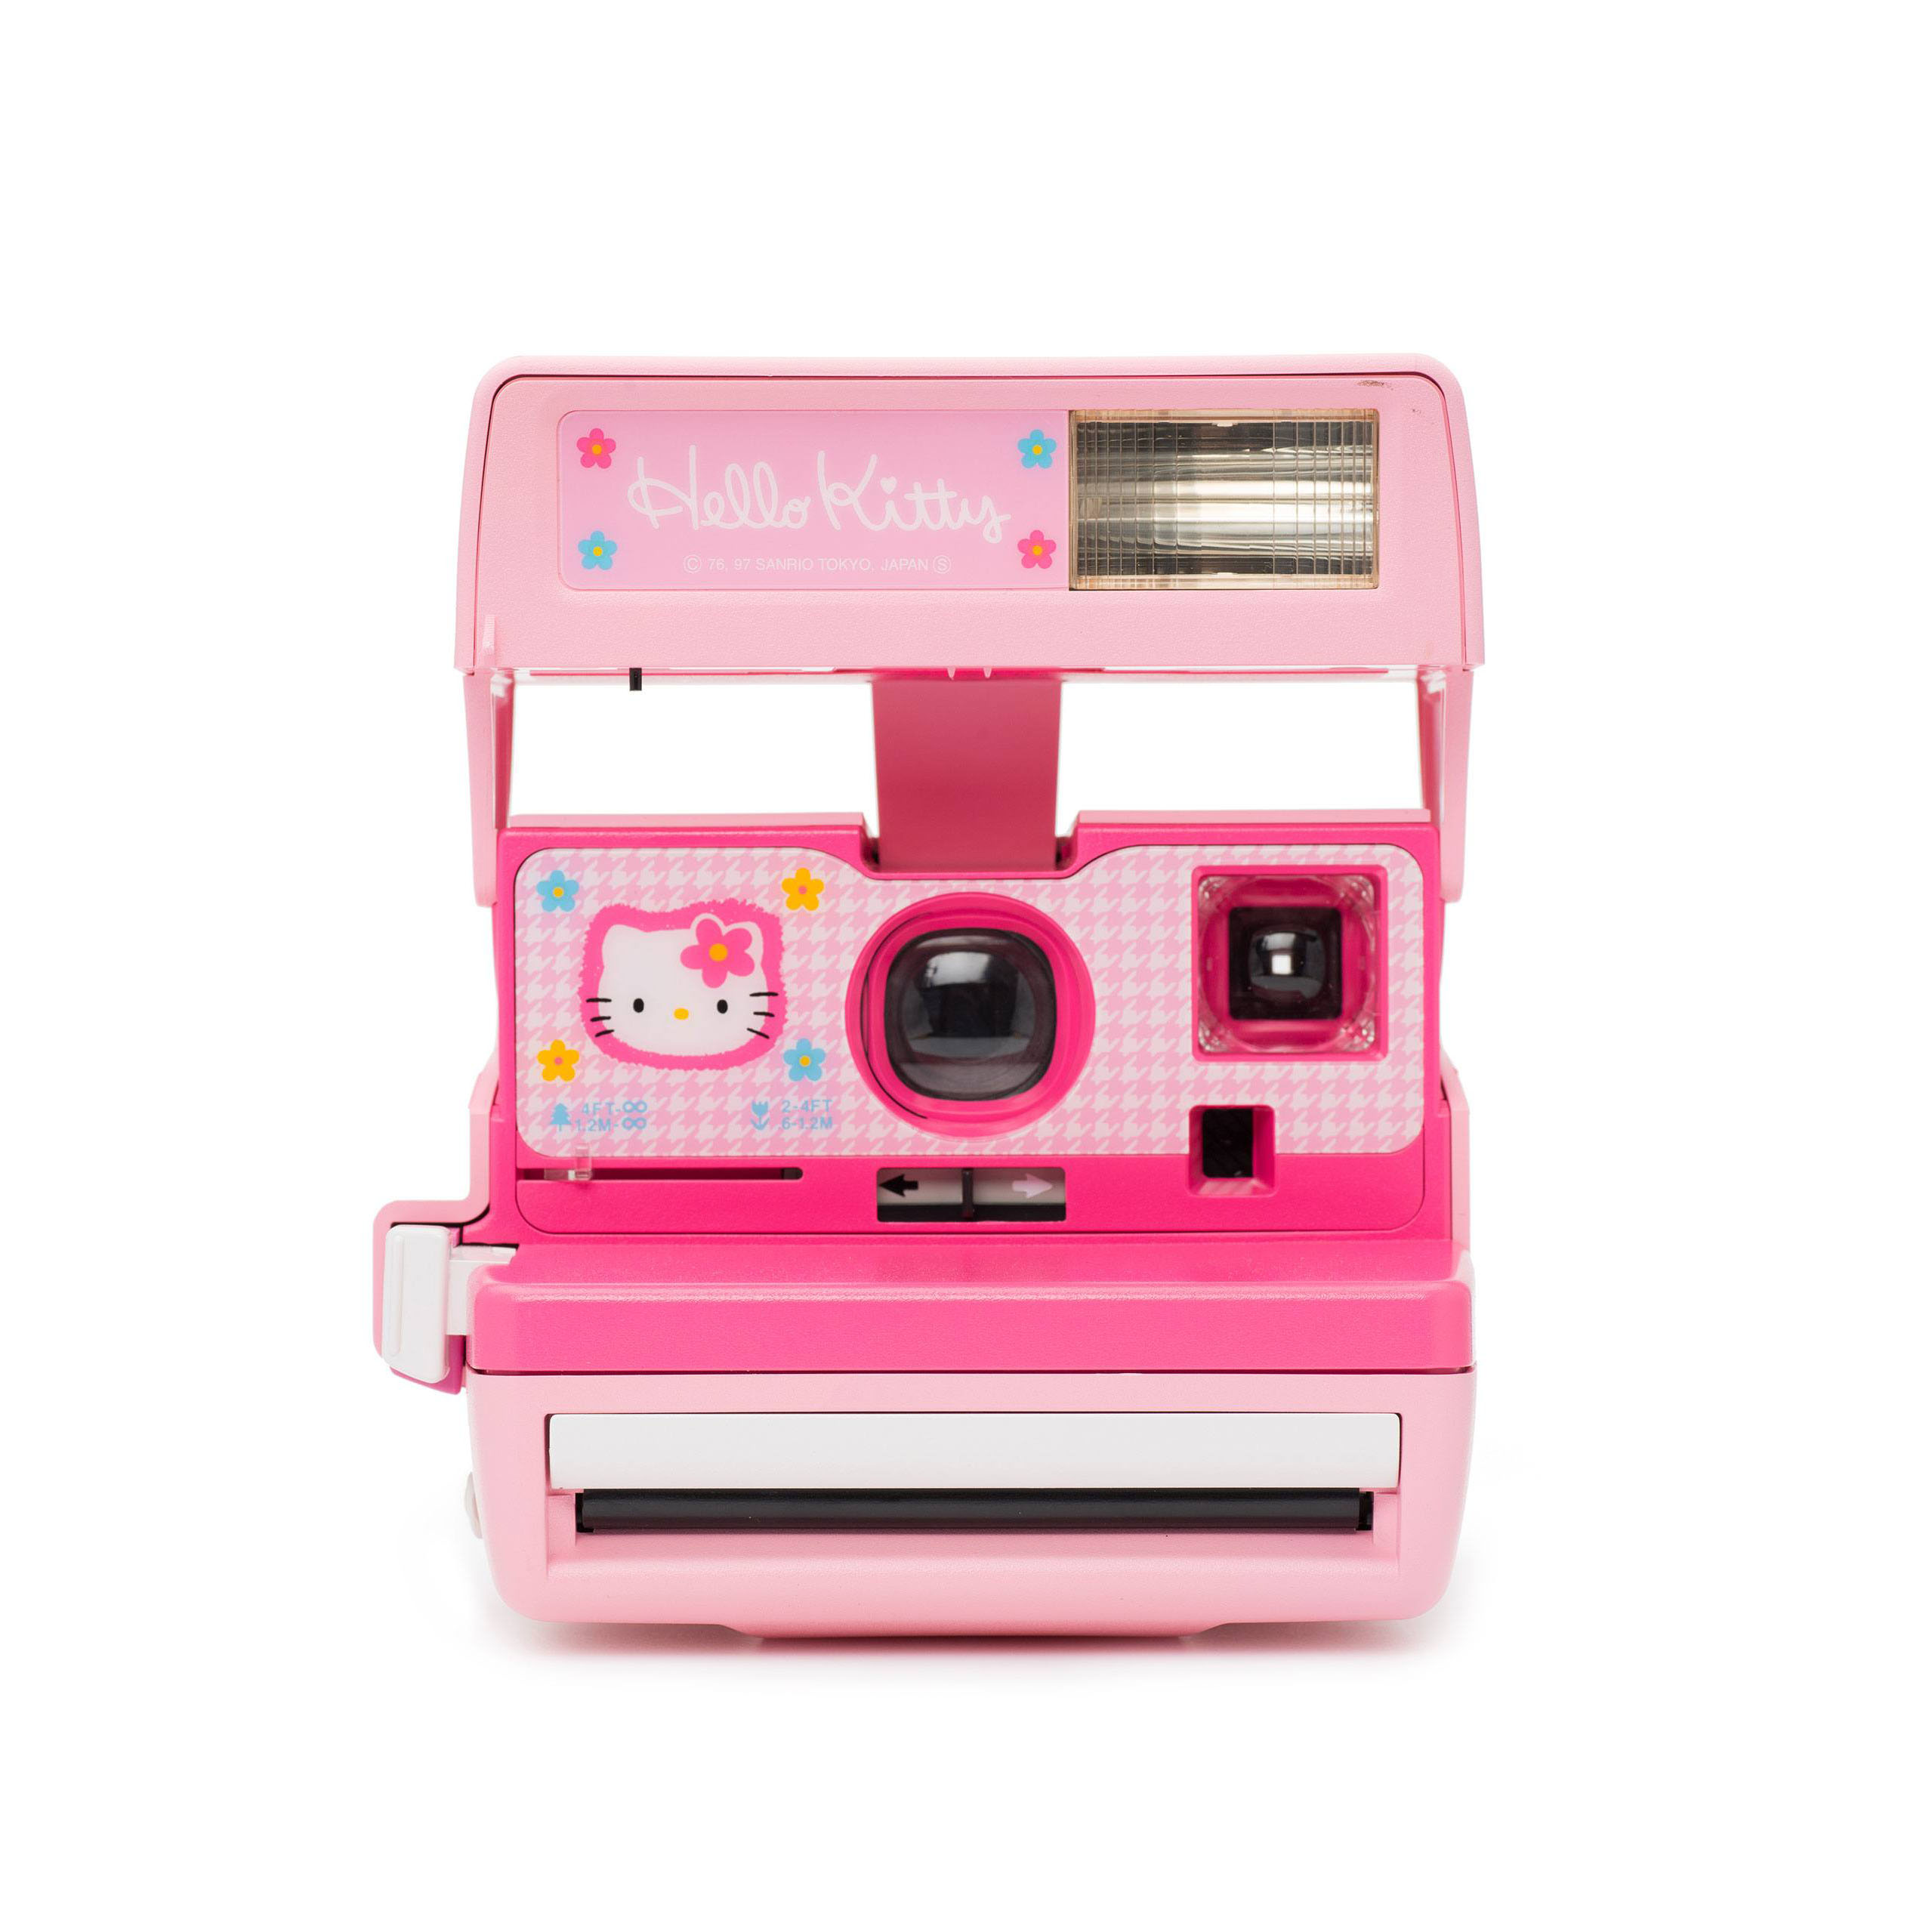 Polaroid 600 Hello Kitty Instant Camera - (Limited Edition from '90s)